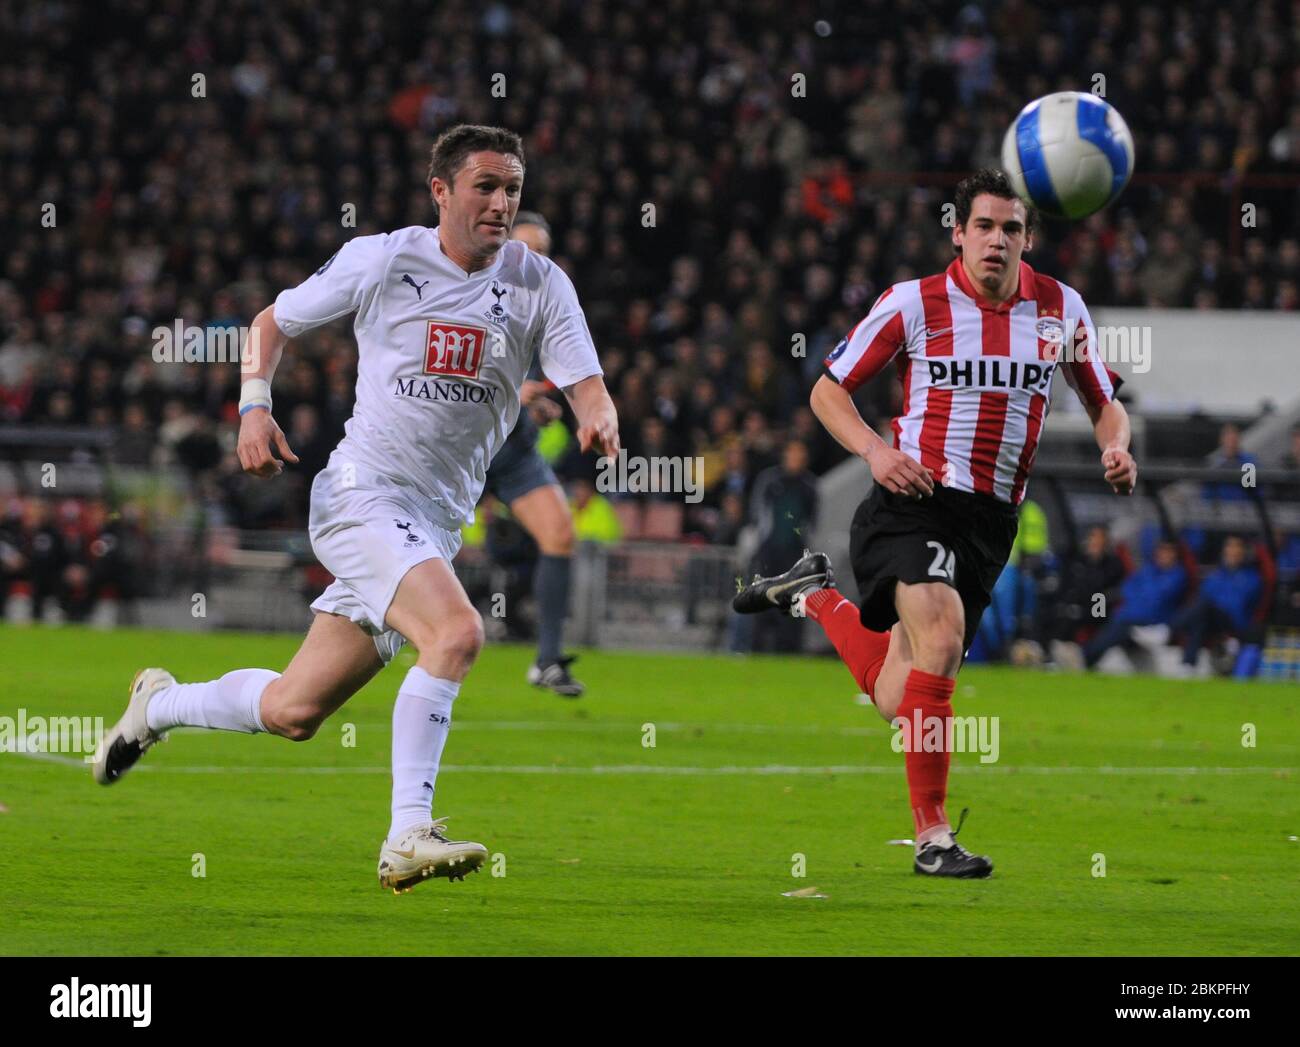 EINDHOVEN, NEDERLAND. MARCH 12: Robbie Keane of Tottenham Hotspur During UEFA Cup Round of 16 Second Leg between PSV Eindhoven and Tottenham Hotspur a Stock Photo